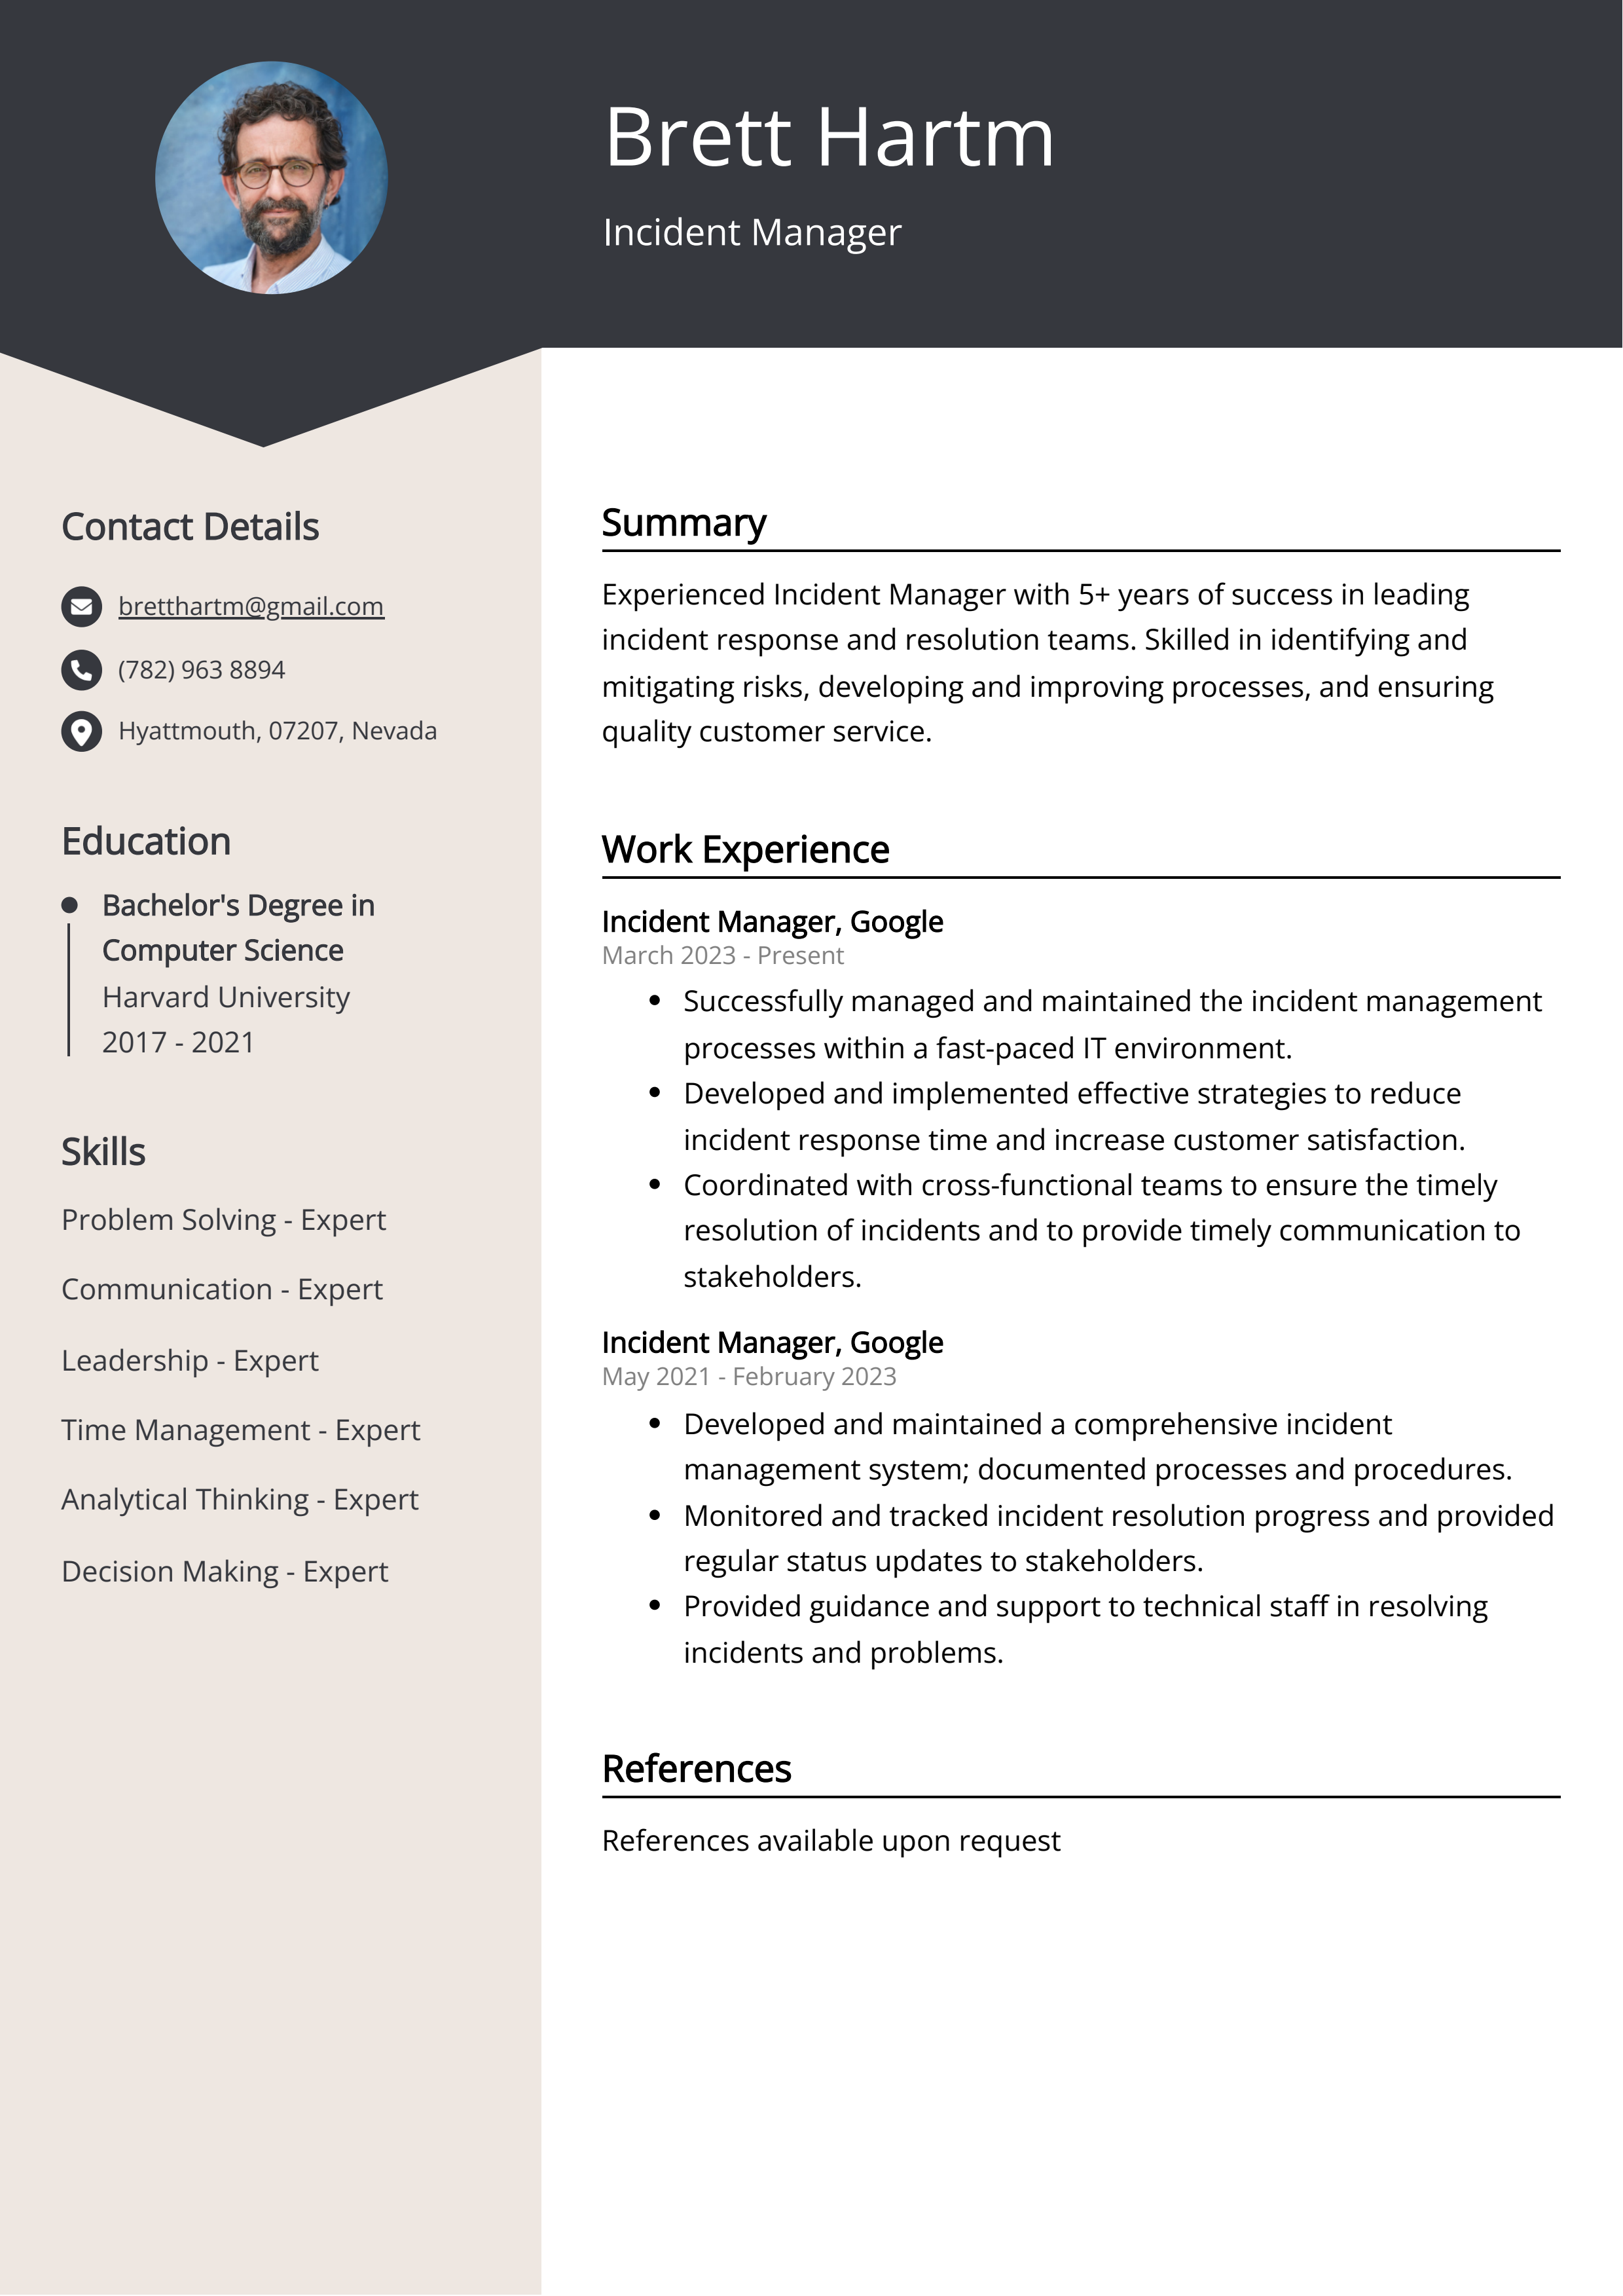 Incident Manager CV Example